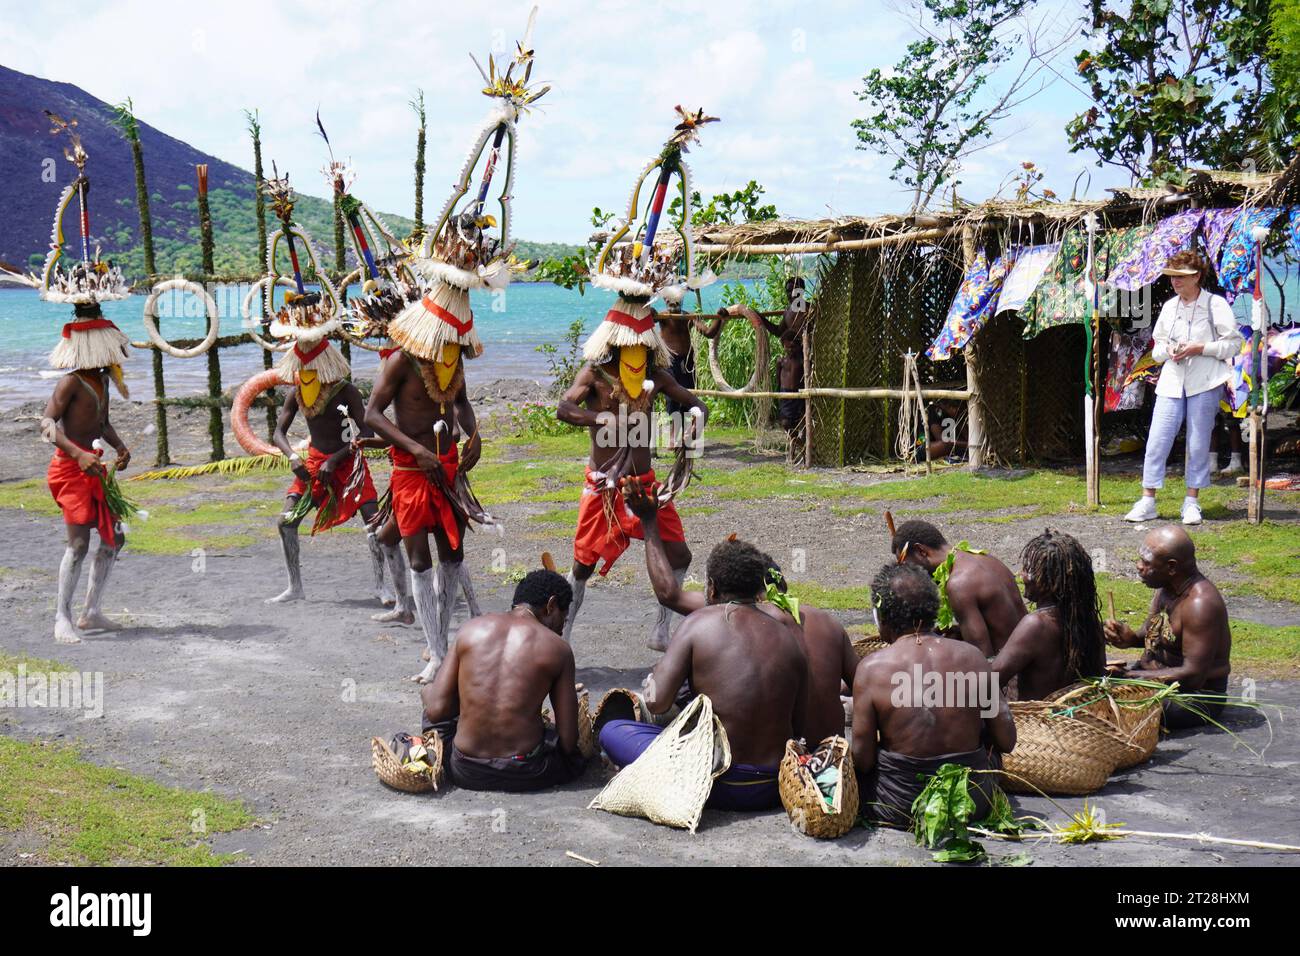 Masked Dancers performing in Front of Seated Musicians at a Mask Festival in Rabaul, Papua New Guinea Stock Photo